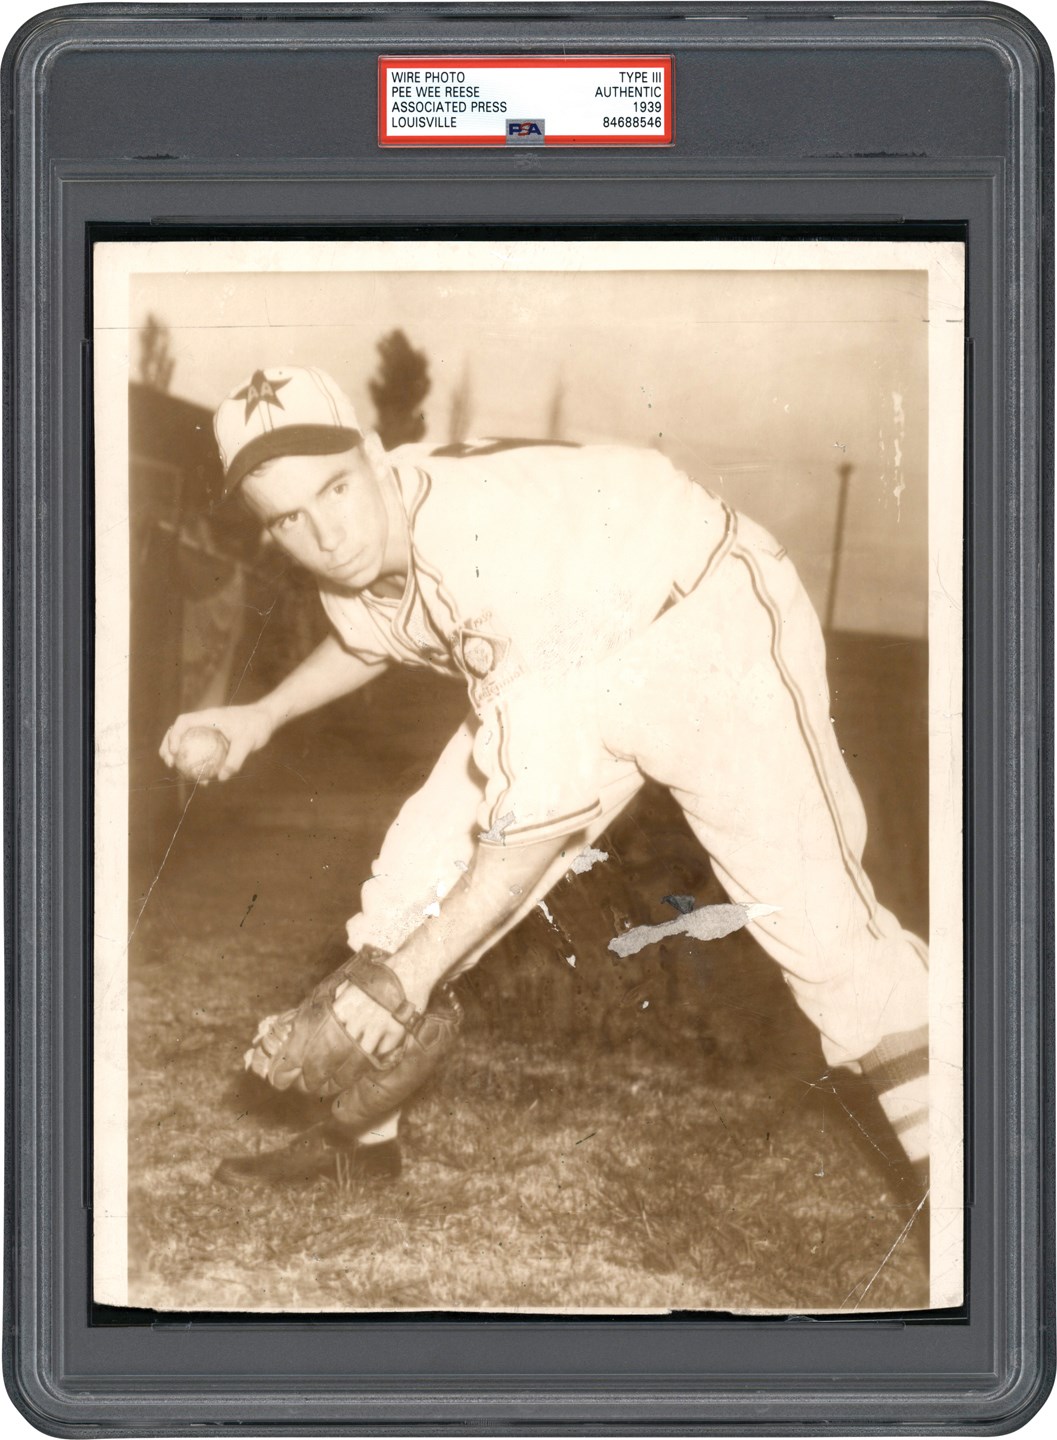 Vintage Sports Photographs - 1939 Pee Wee Reese Pre-Rookie Photograph (PSA Type III)